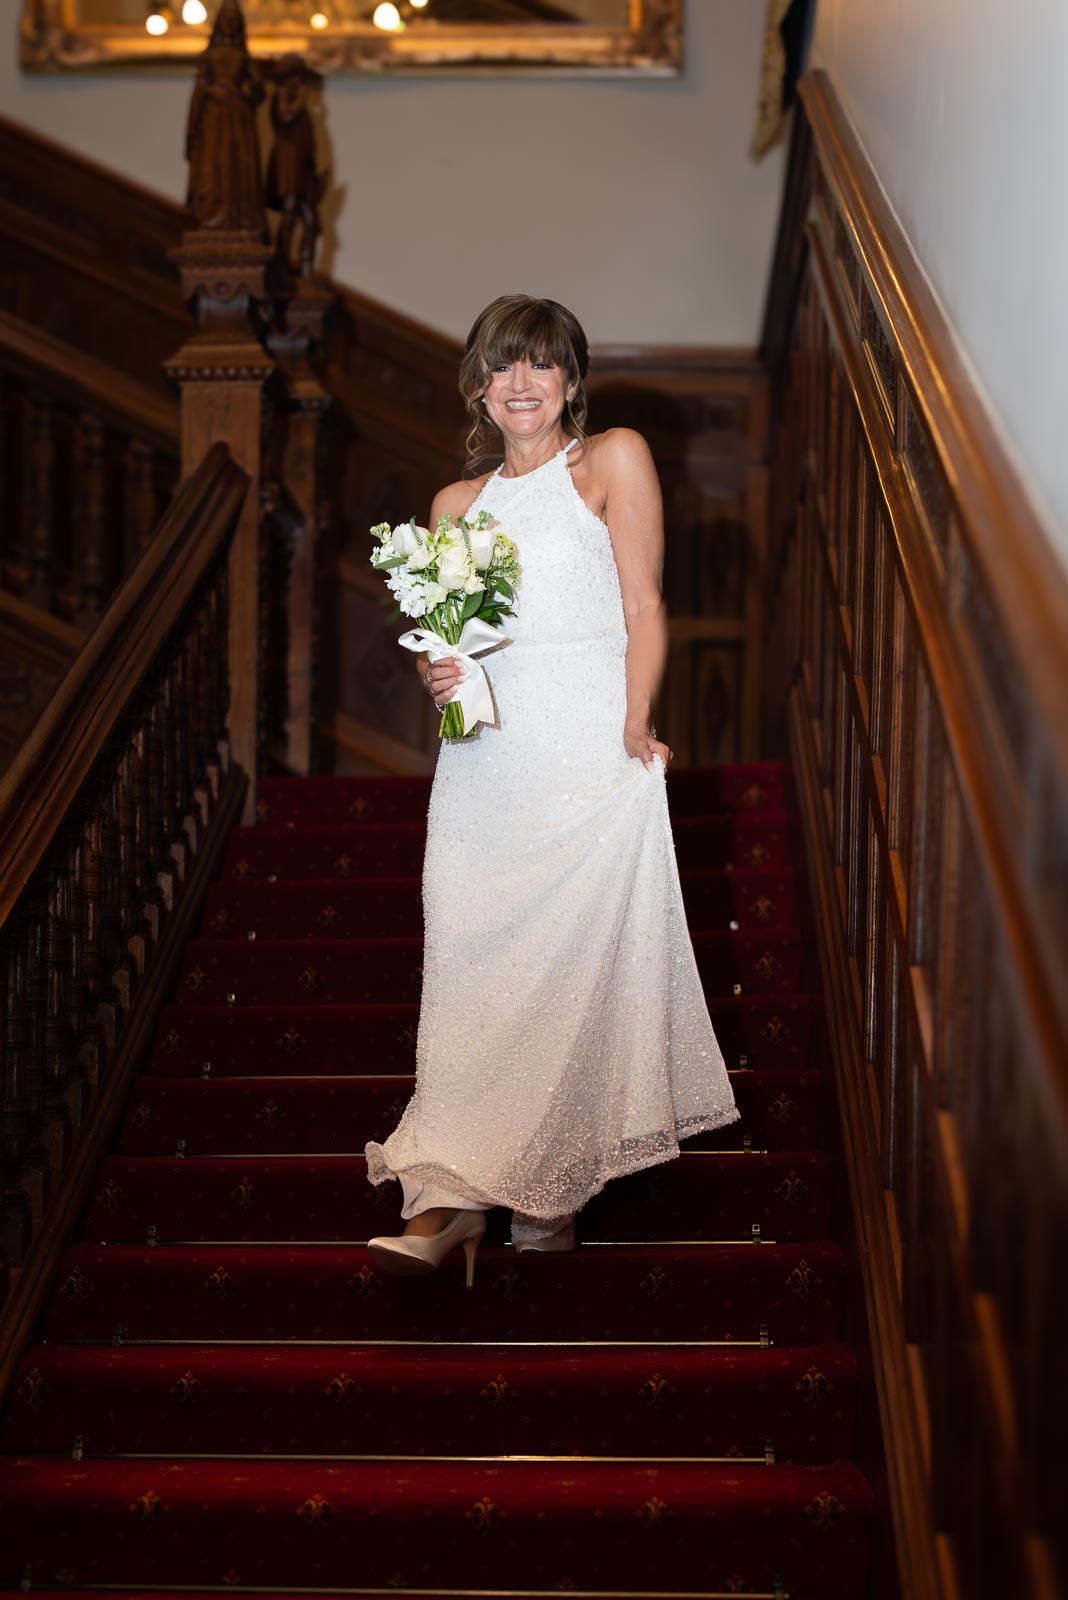 Carmen descends down the stairs at Manor by the Lake in Cheltenham before her wedding to Jeff.